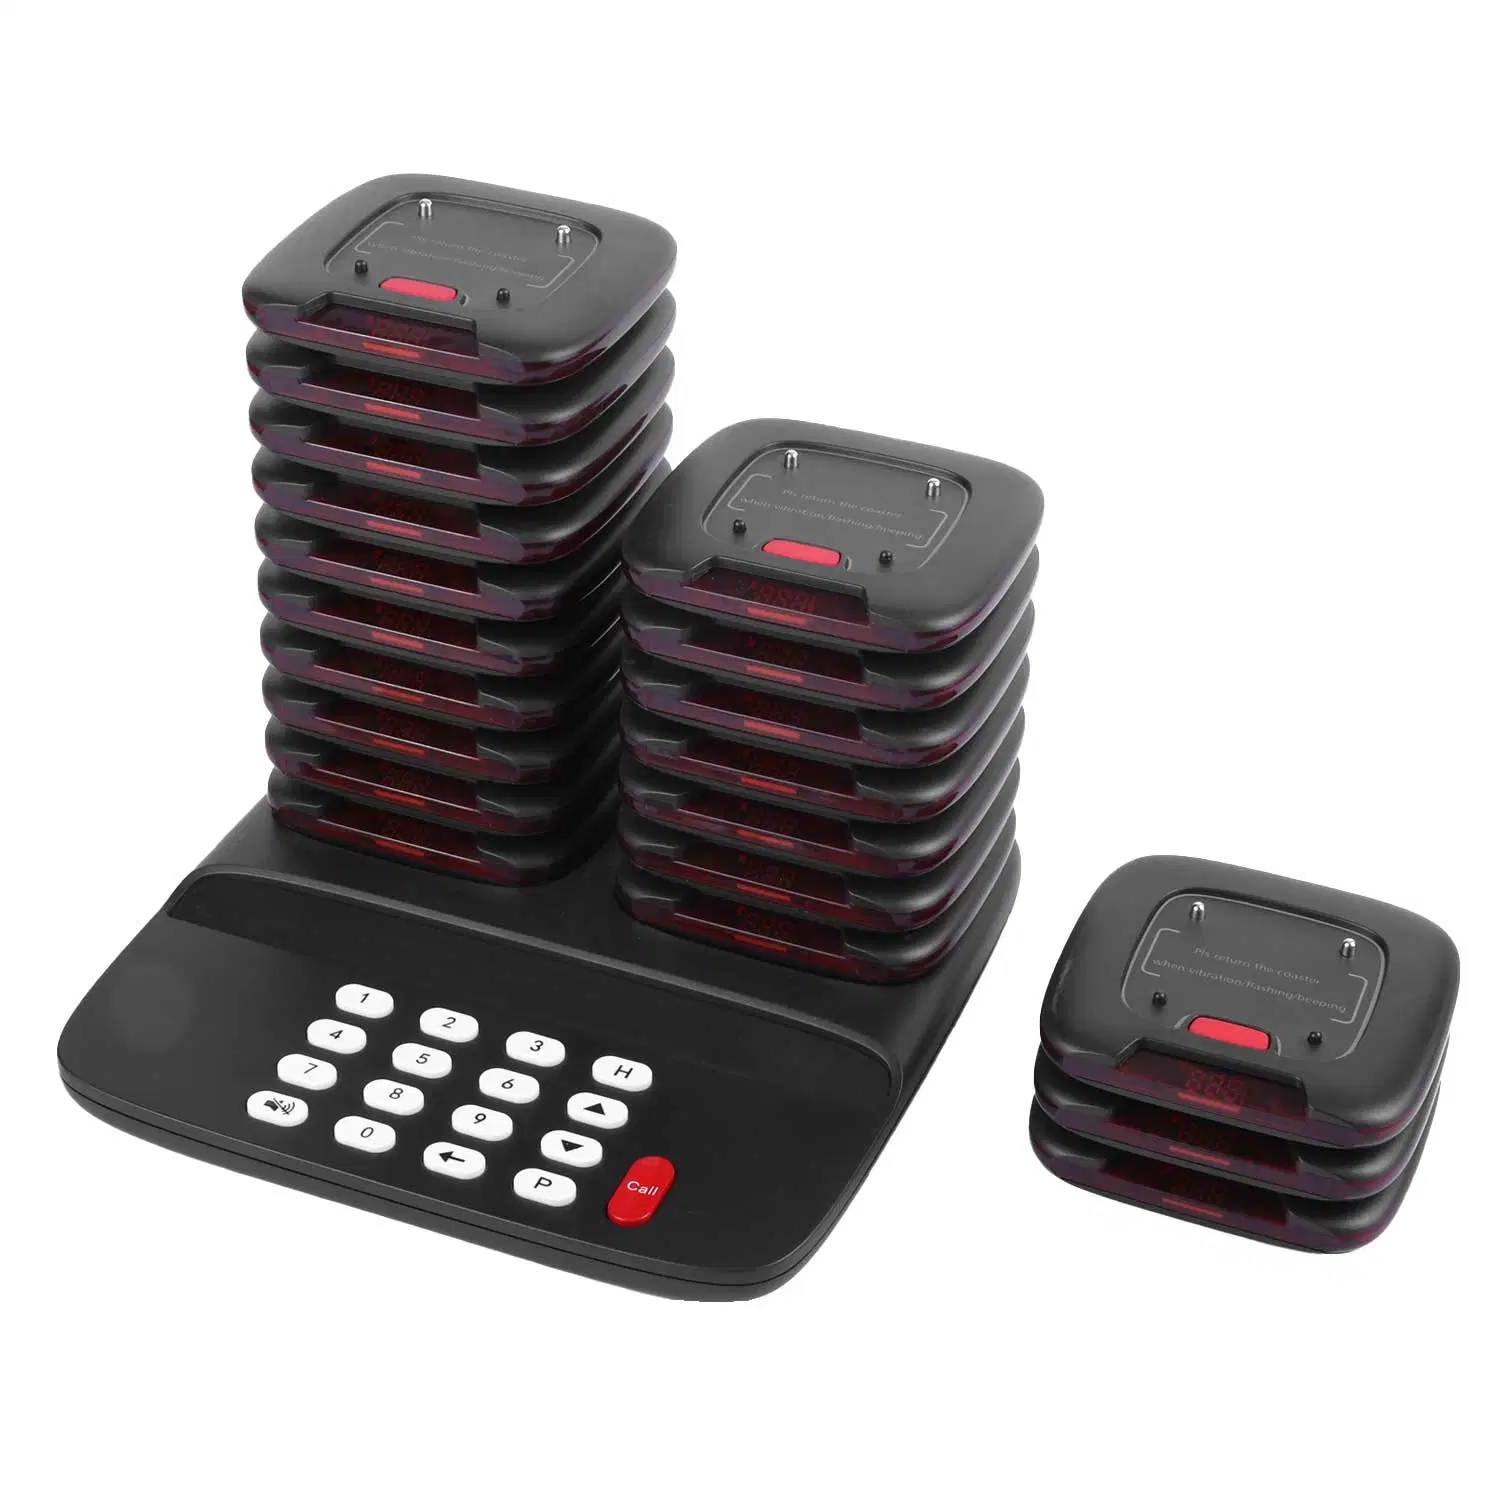 Wireless Long Range Restaurant Queuing Paging System Beeping Vibration Buzzer Calling System Paging System